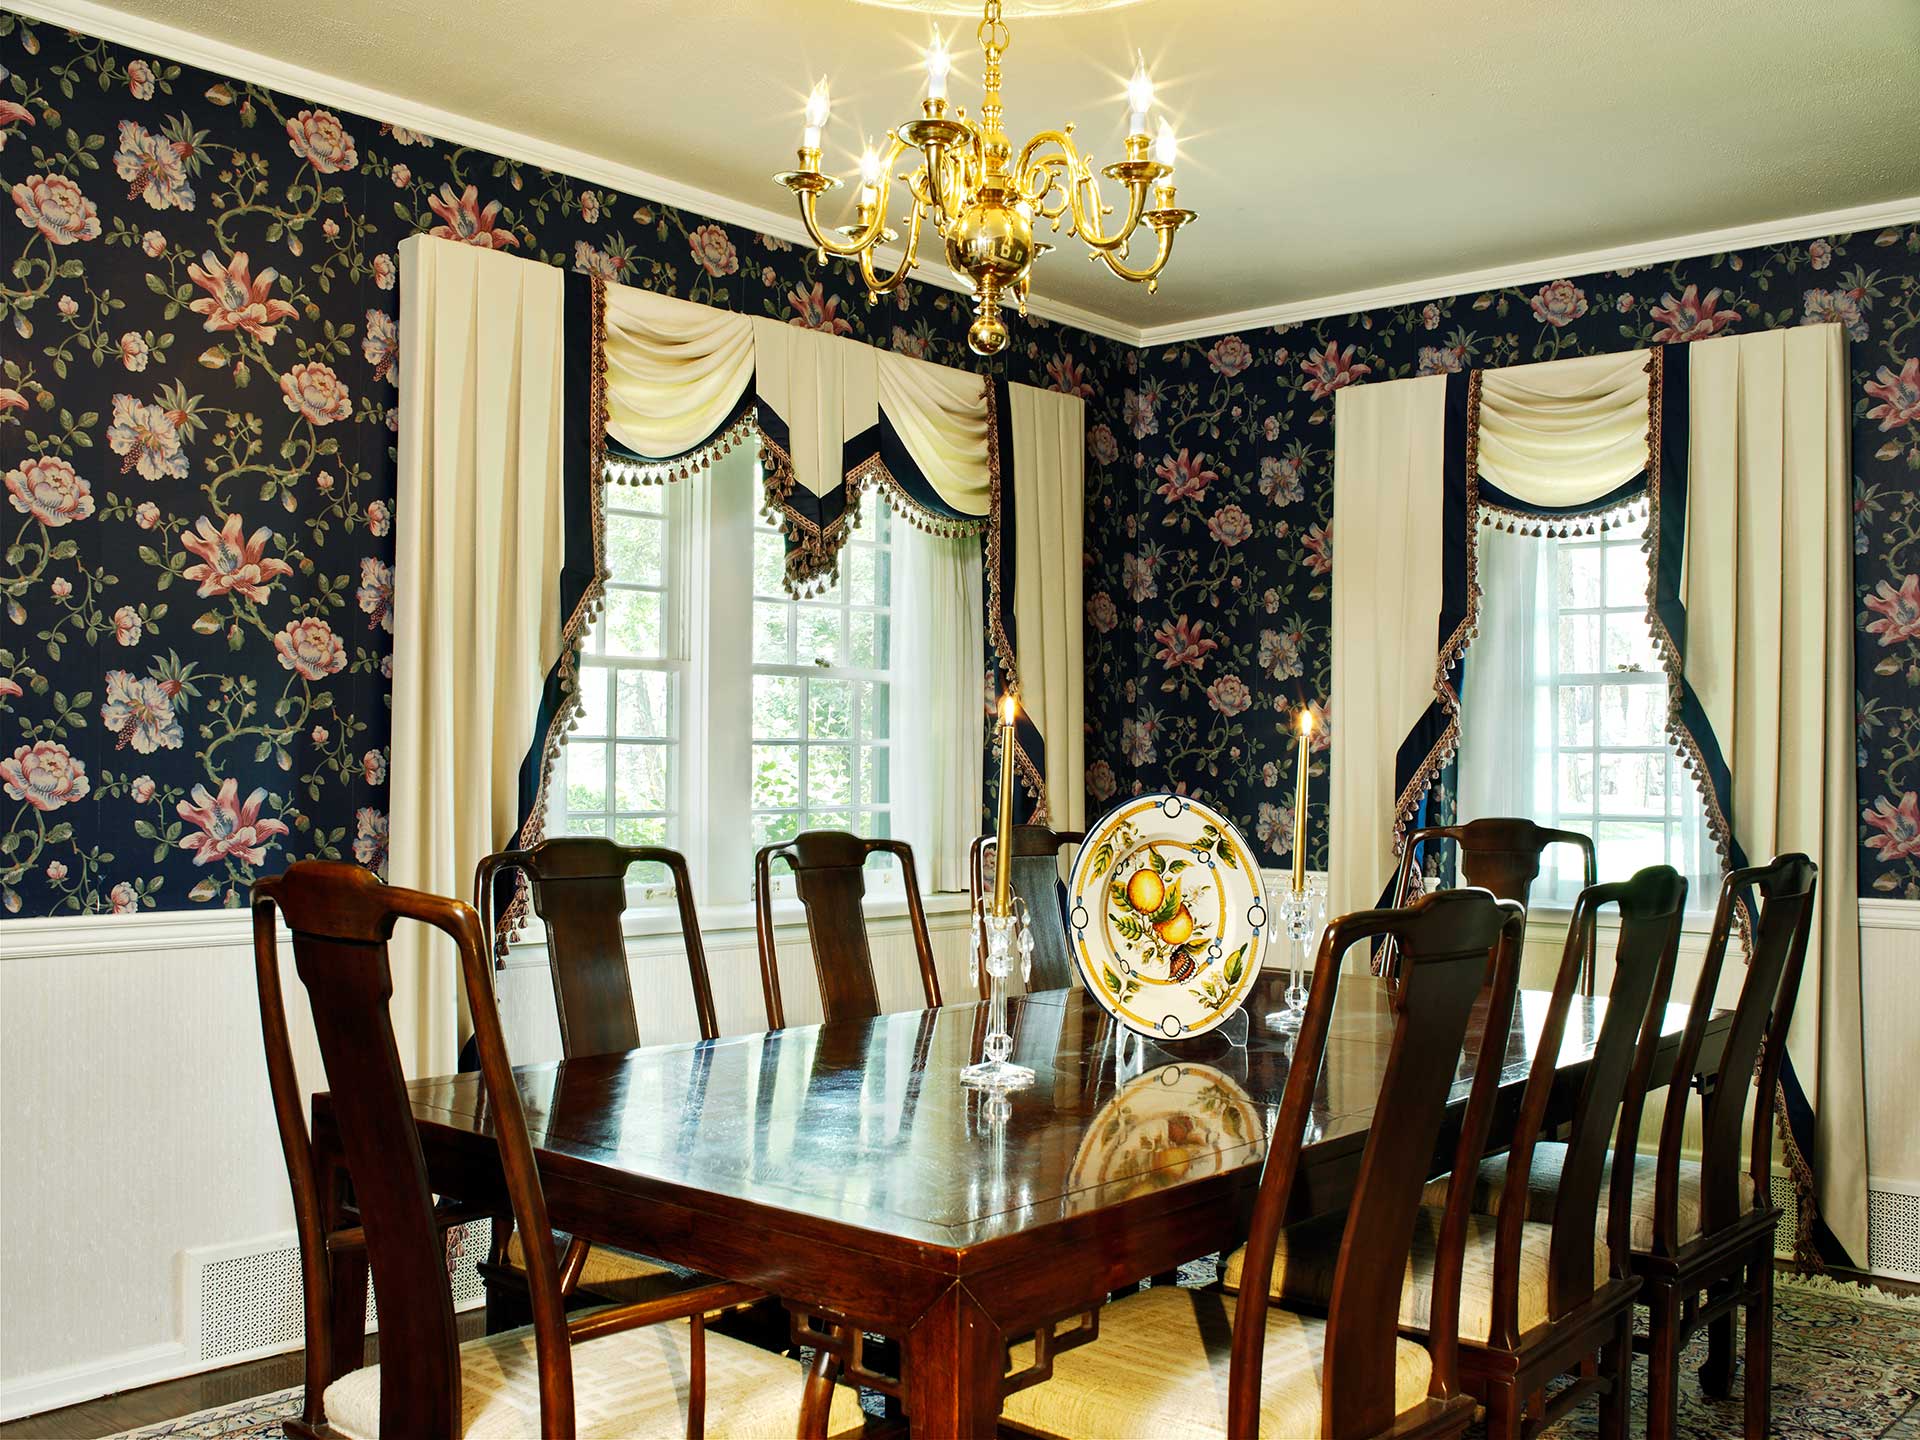 Guest House dining room